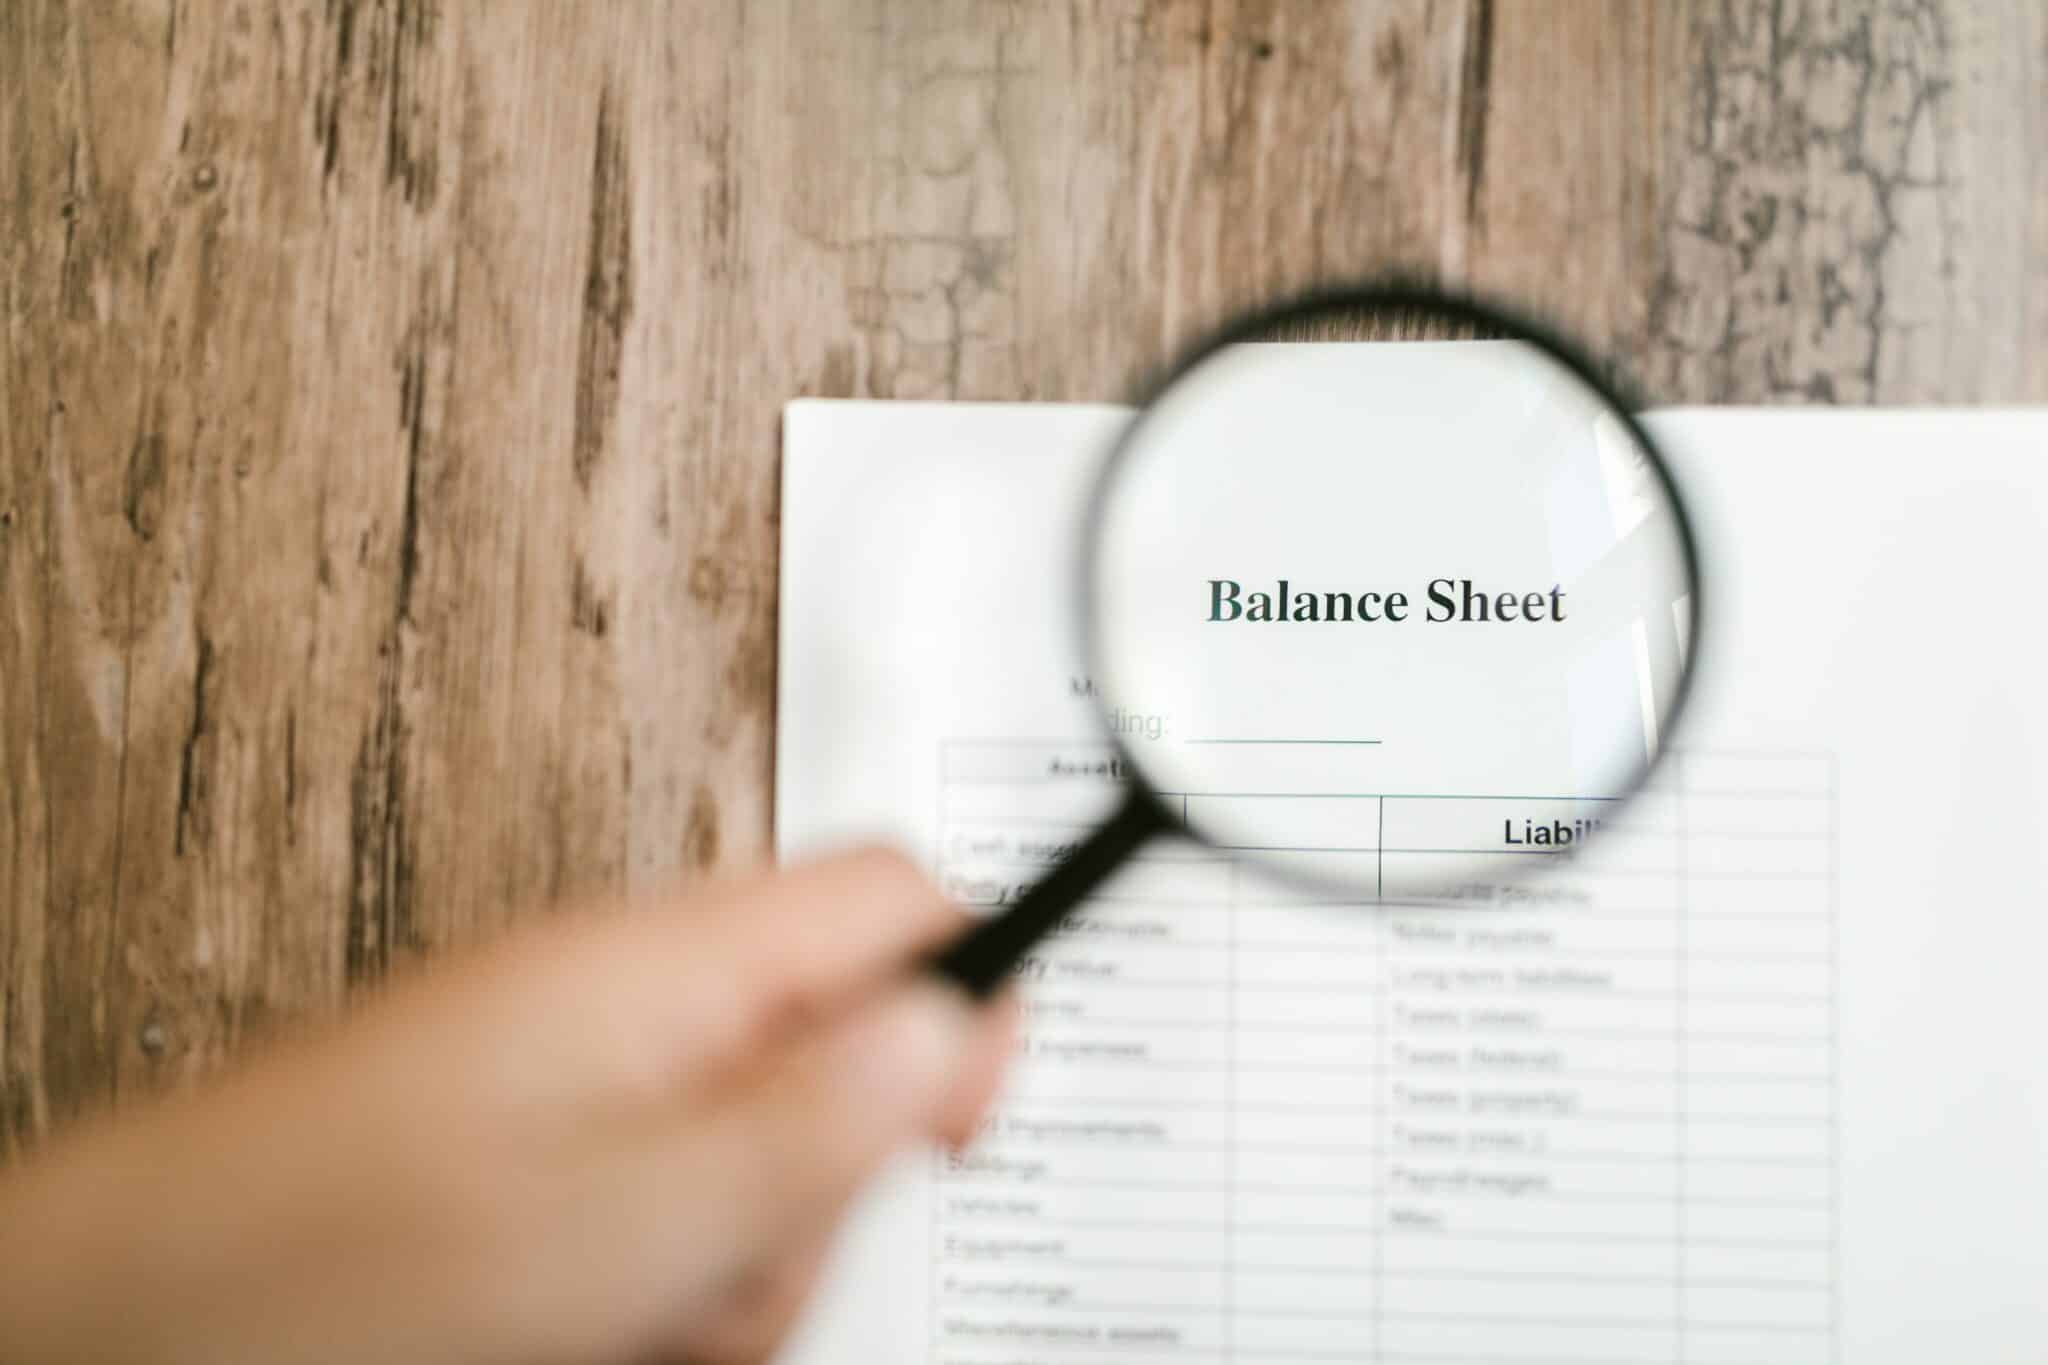 How Are The Balance Sheet and Income Statement Connected?